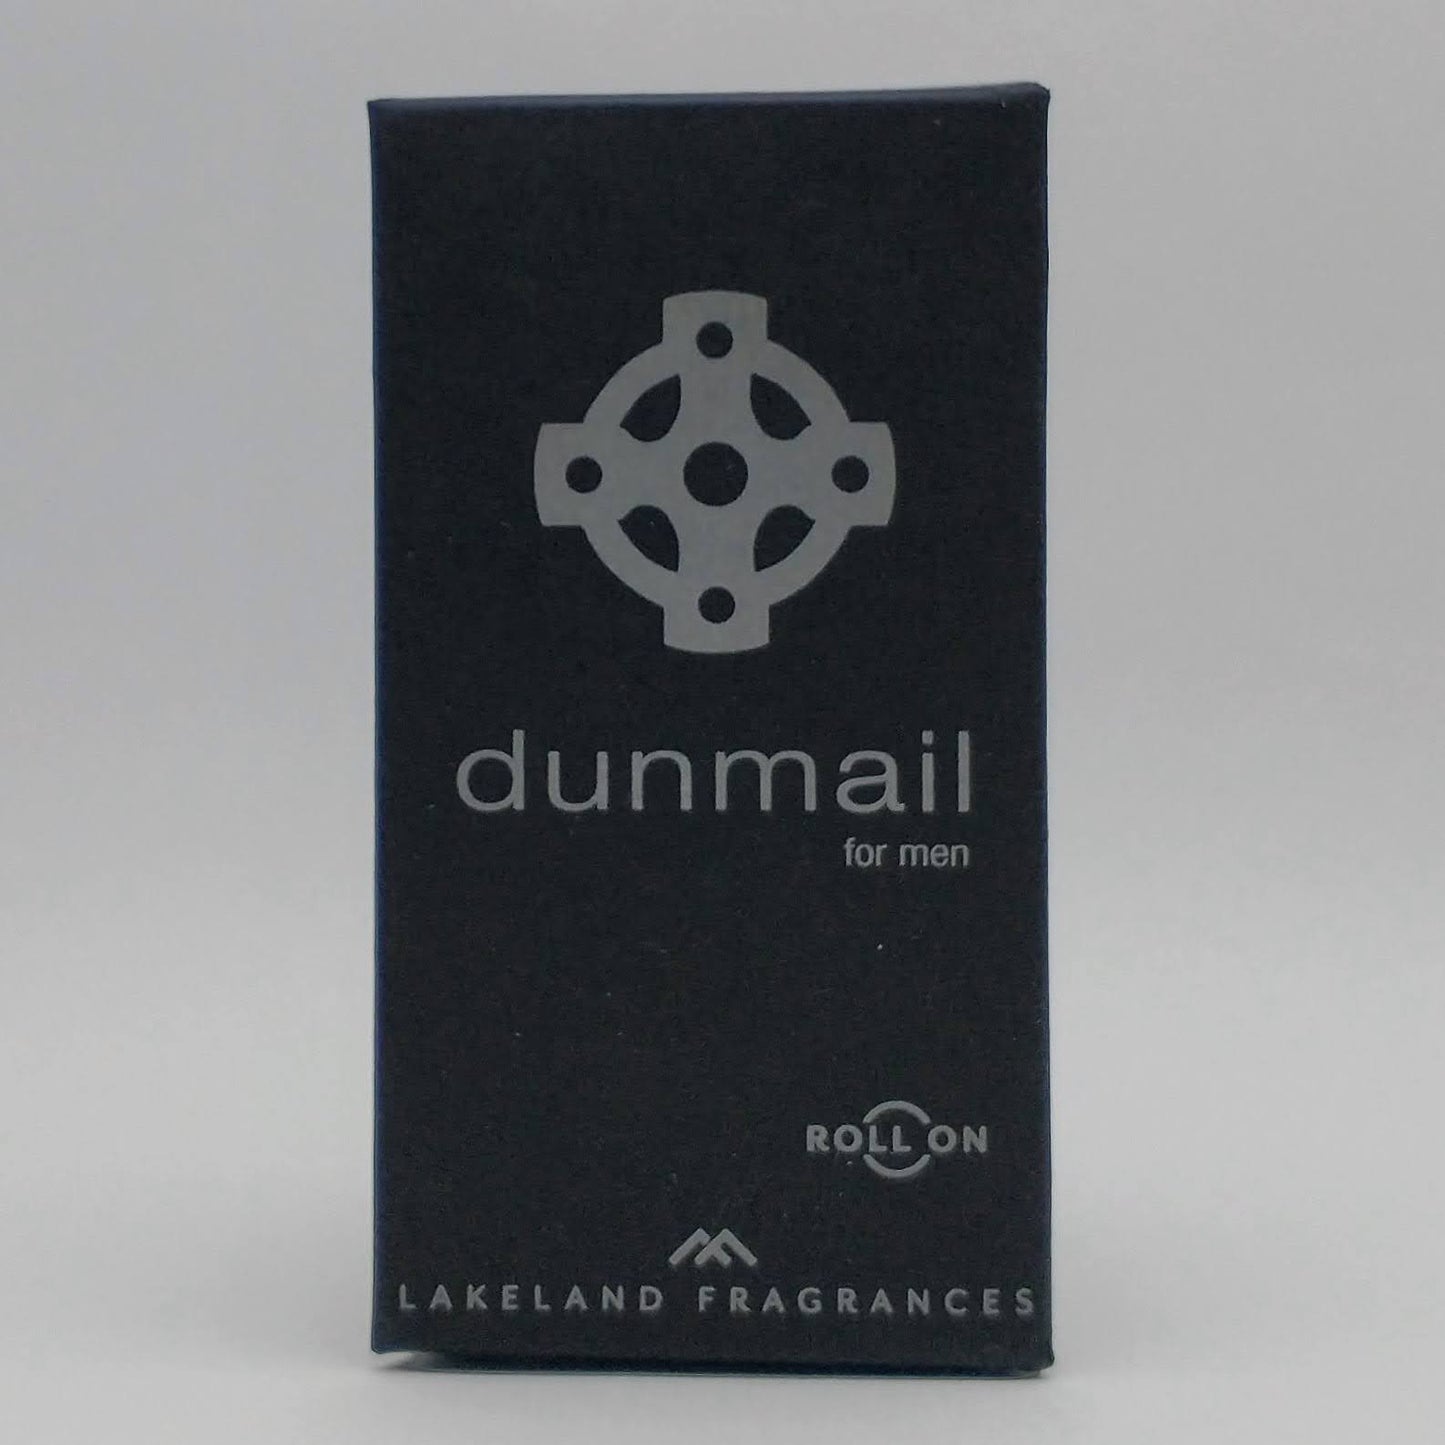 Dunmail 10ml Roll On